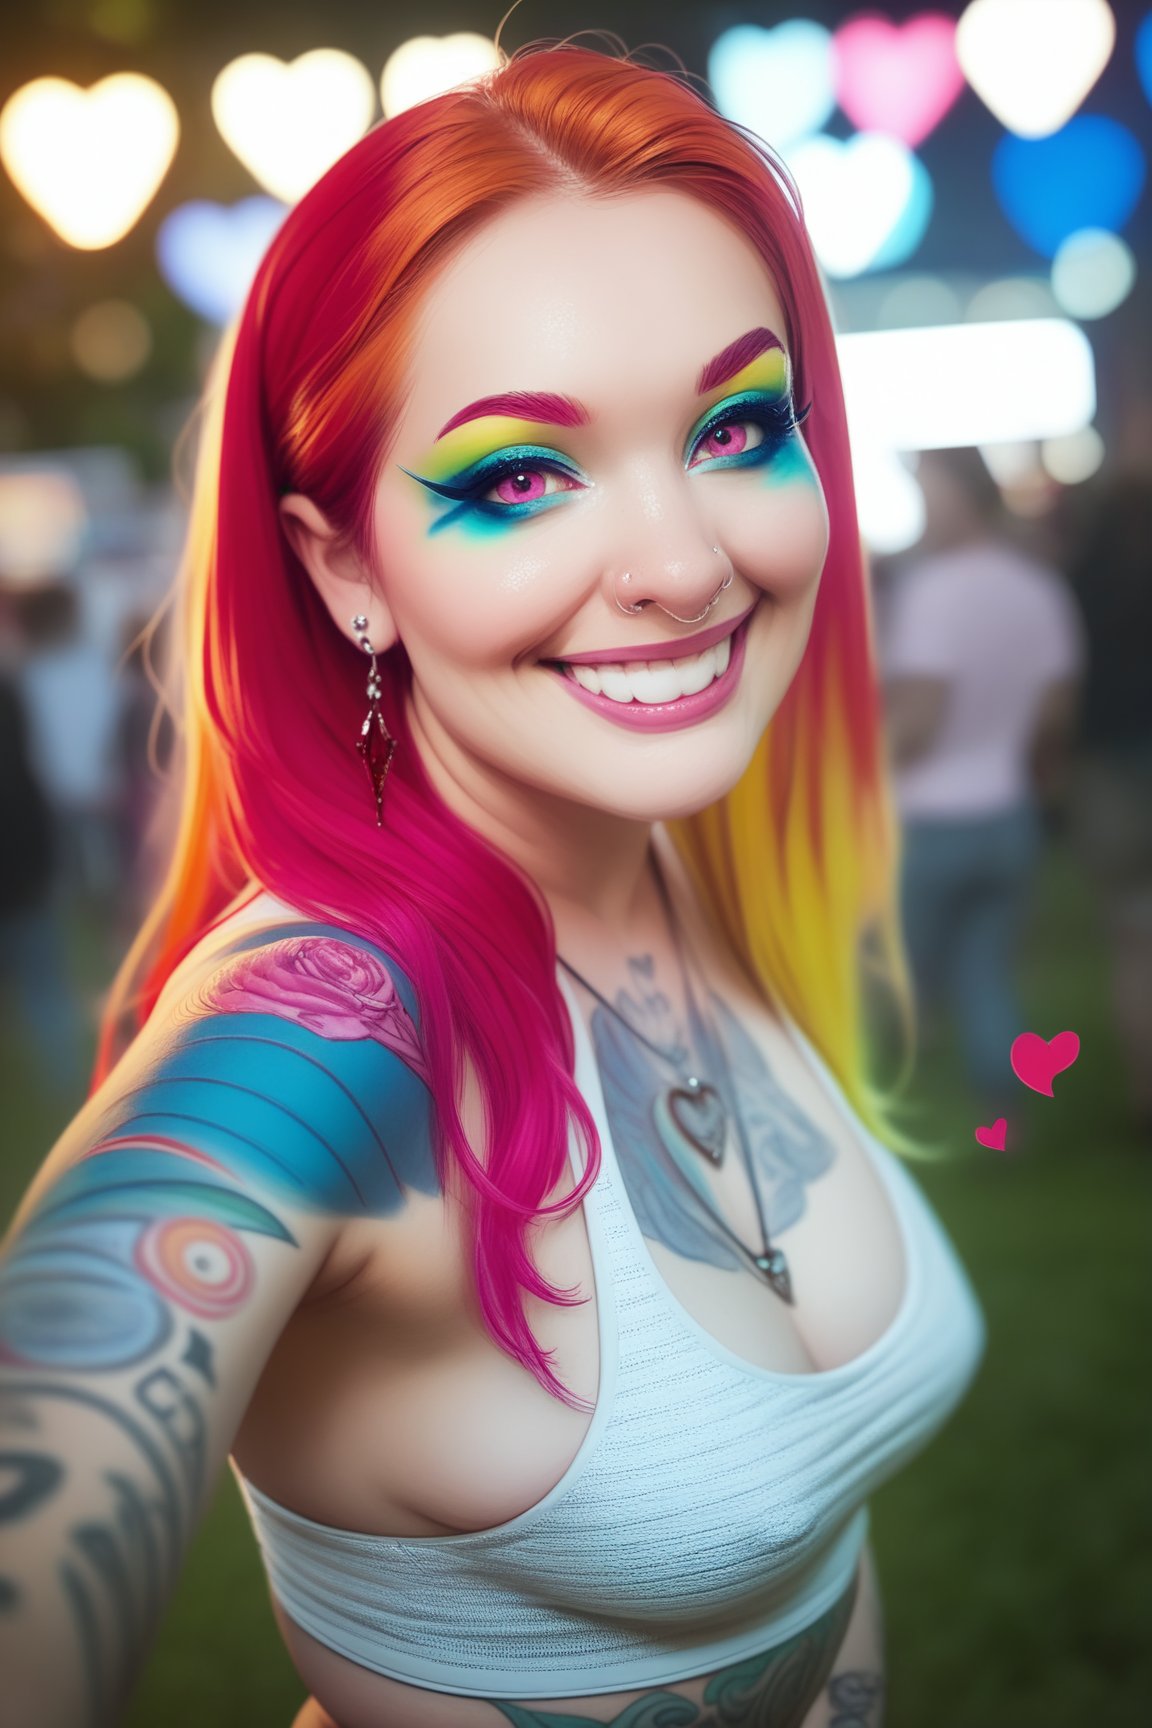 score_9,score_8_up, score_7_up, score_6_up, score_5_up, score_4_up, futanari, looking at viewer, fair skin, bobbed hair, ((raver girl, colorful makeup, piercings, tattoos)), breasts, thicc, curvy,((normal penis,flaccid, testicles)), (lascivious grin), posed, pinup girl, hearts, covered in dripping cum, dripping pre cum, hyper realism, photo realistic, 8k, digital slr,glitter, nightime, music festival, lasers, bokeh,pink-emo